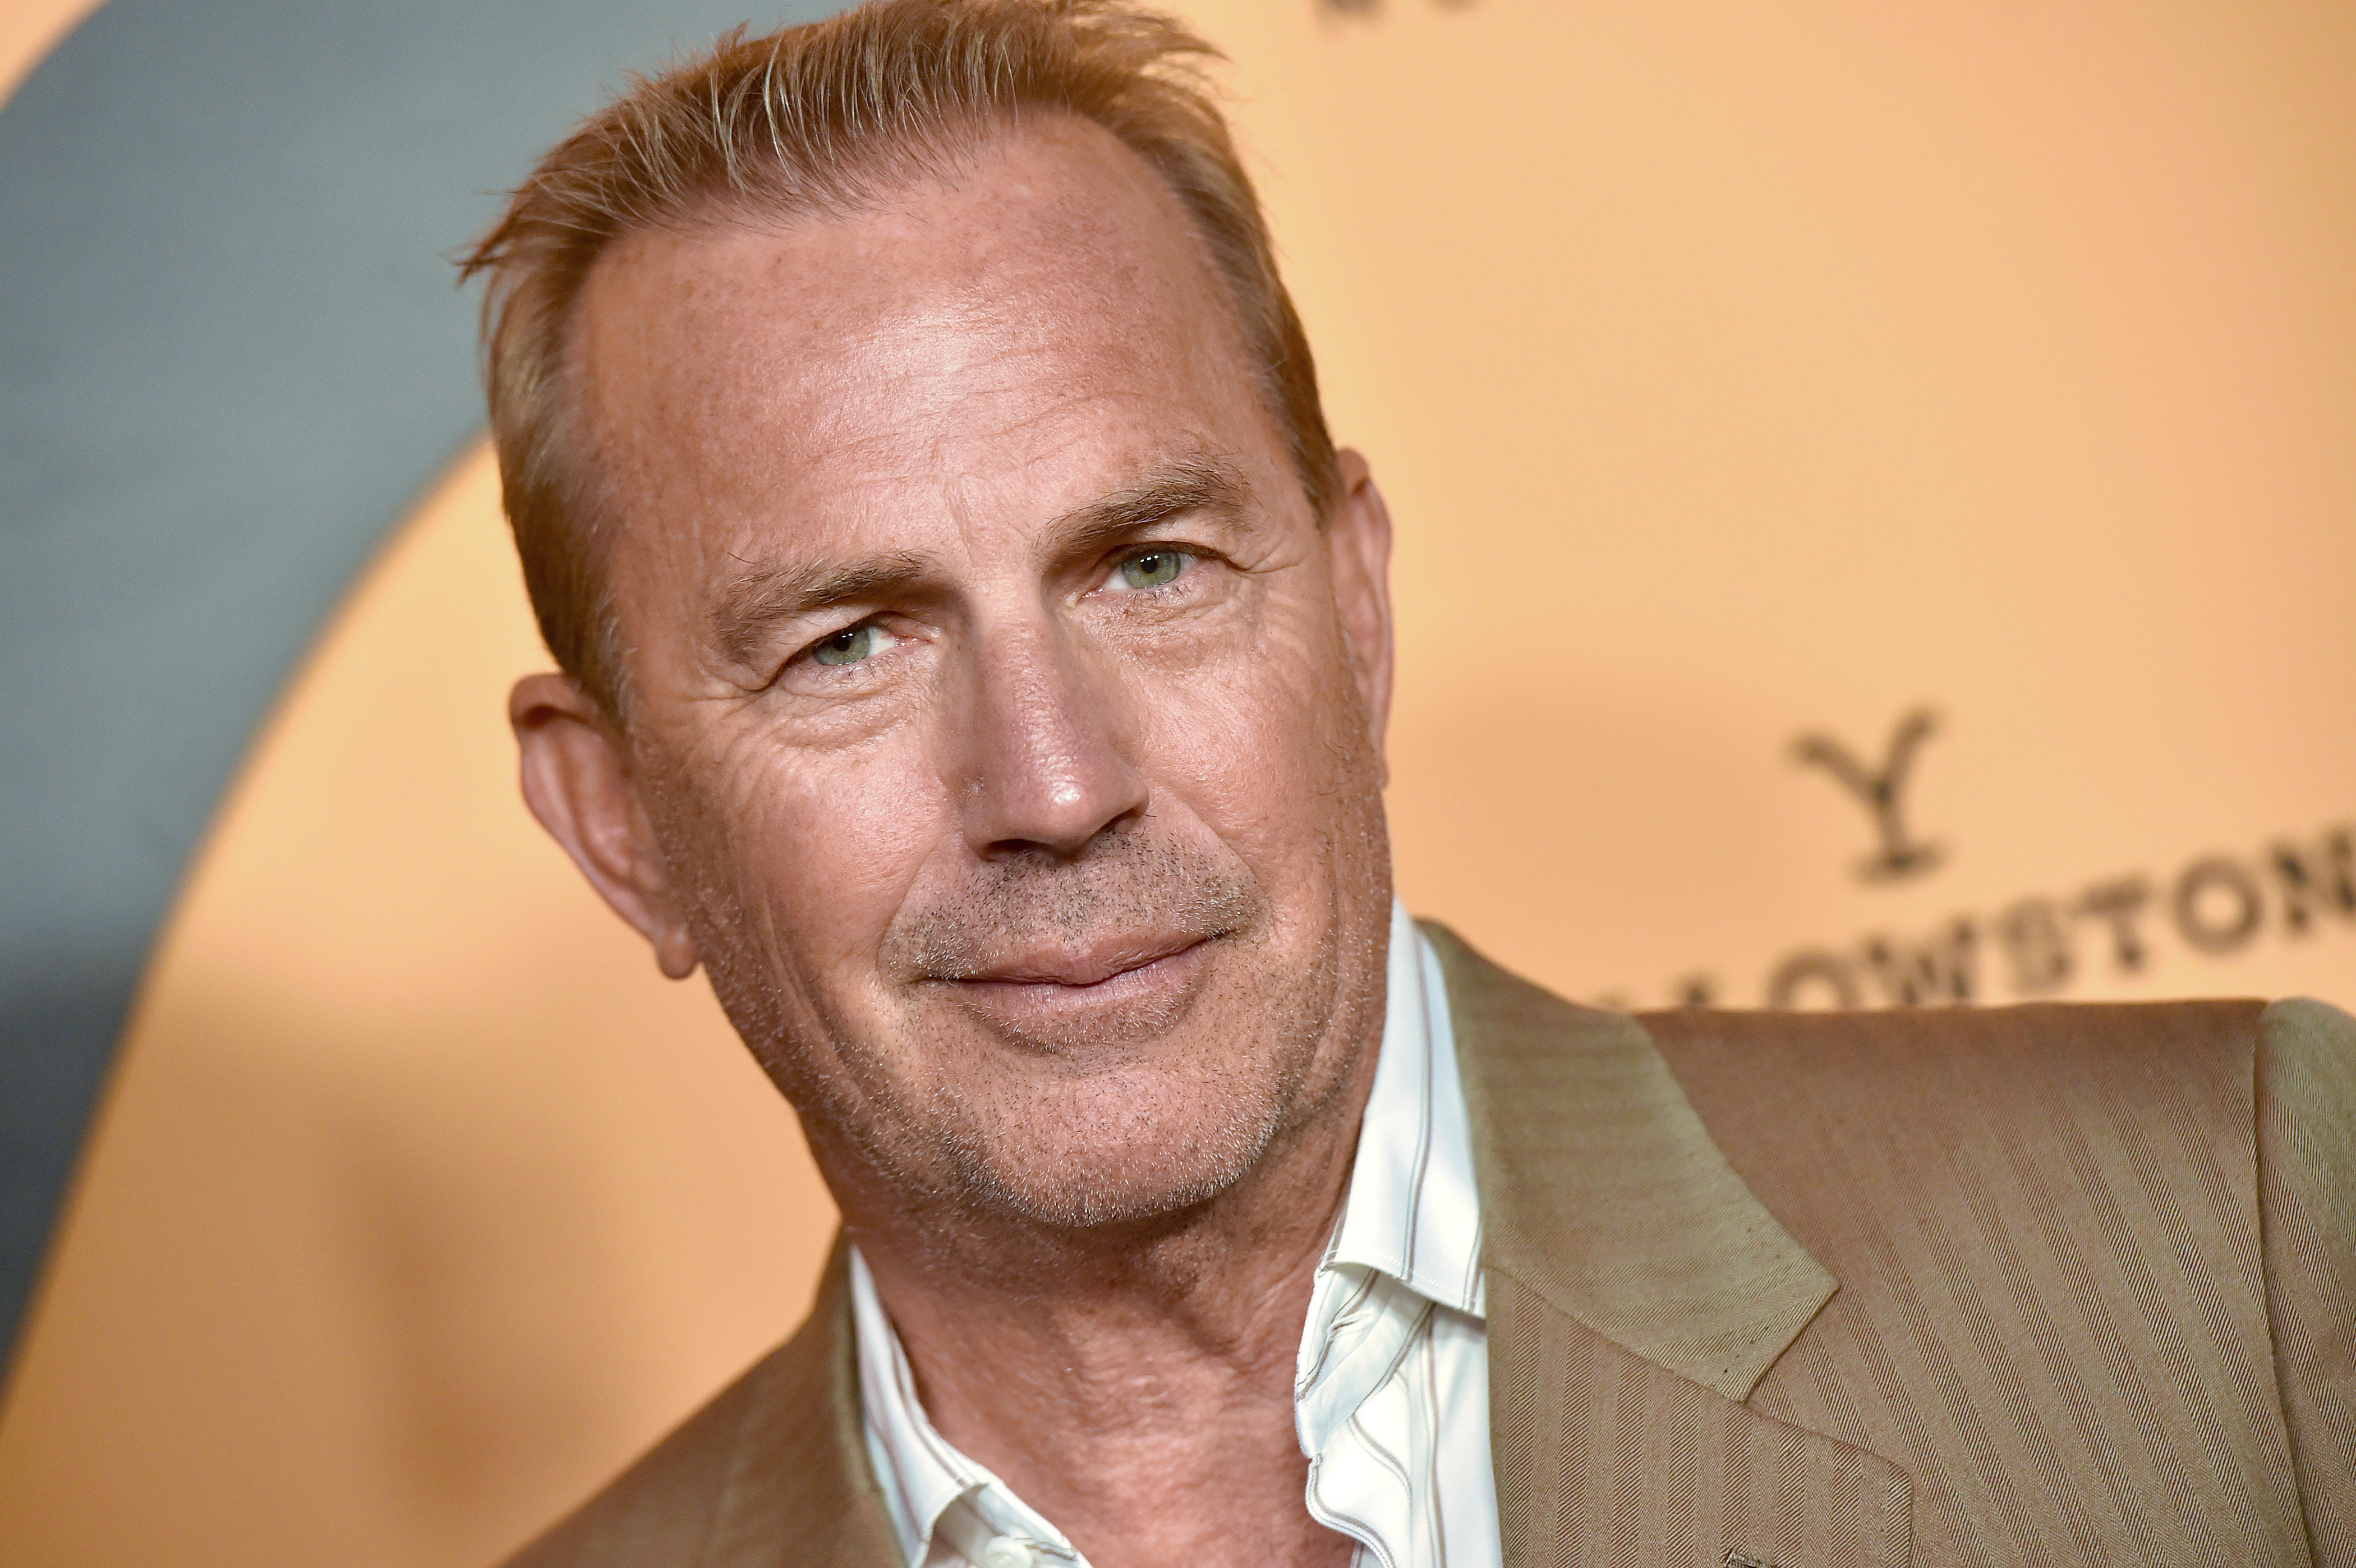 Kevin Costner attends the premiere party for Paramount Network's "Yellowstone" Season 2 at Lombardi House on May 30, 2019, in Los Angeles, California. | Source: Getty Images